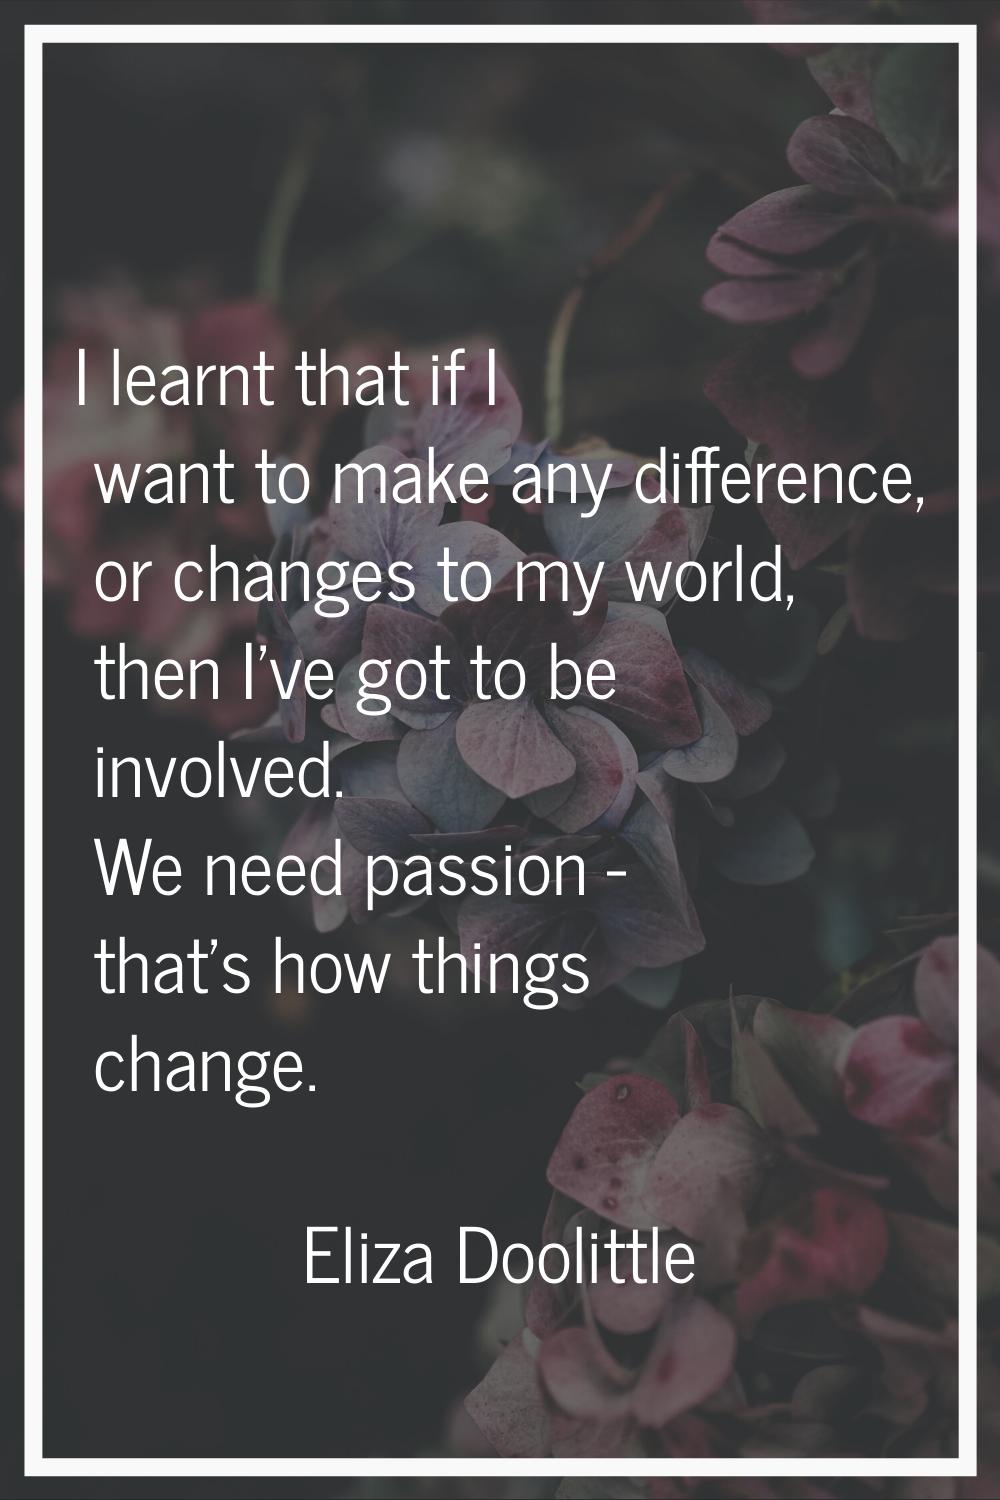 I learnt that if I want to make any difference, or changes to my world, then I've got to be involve